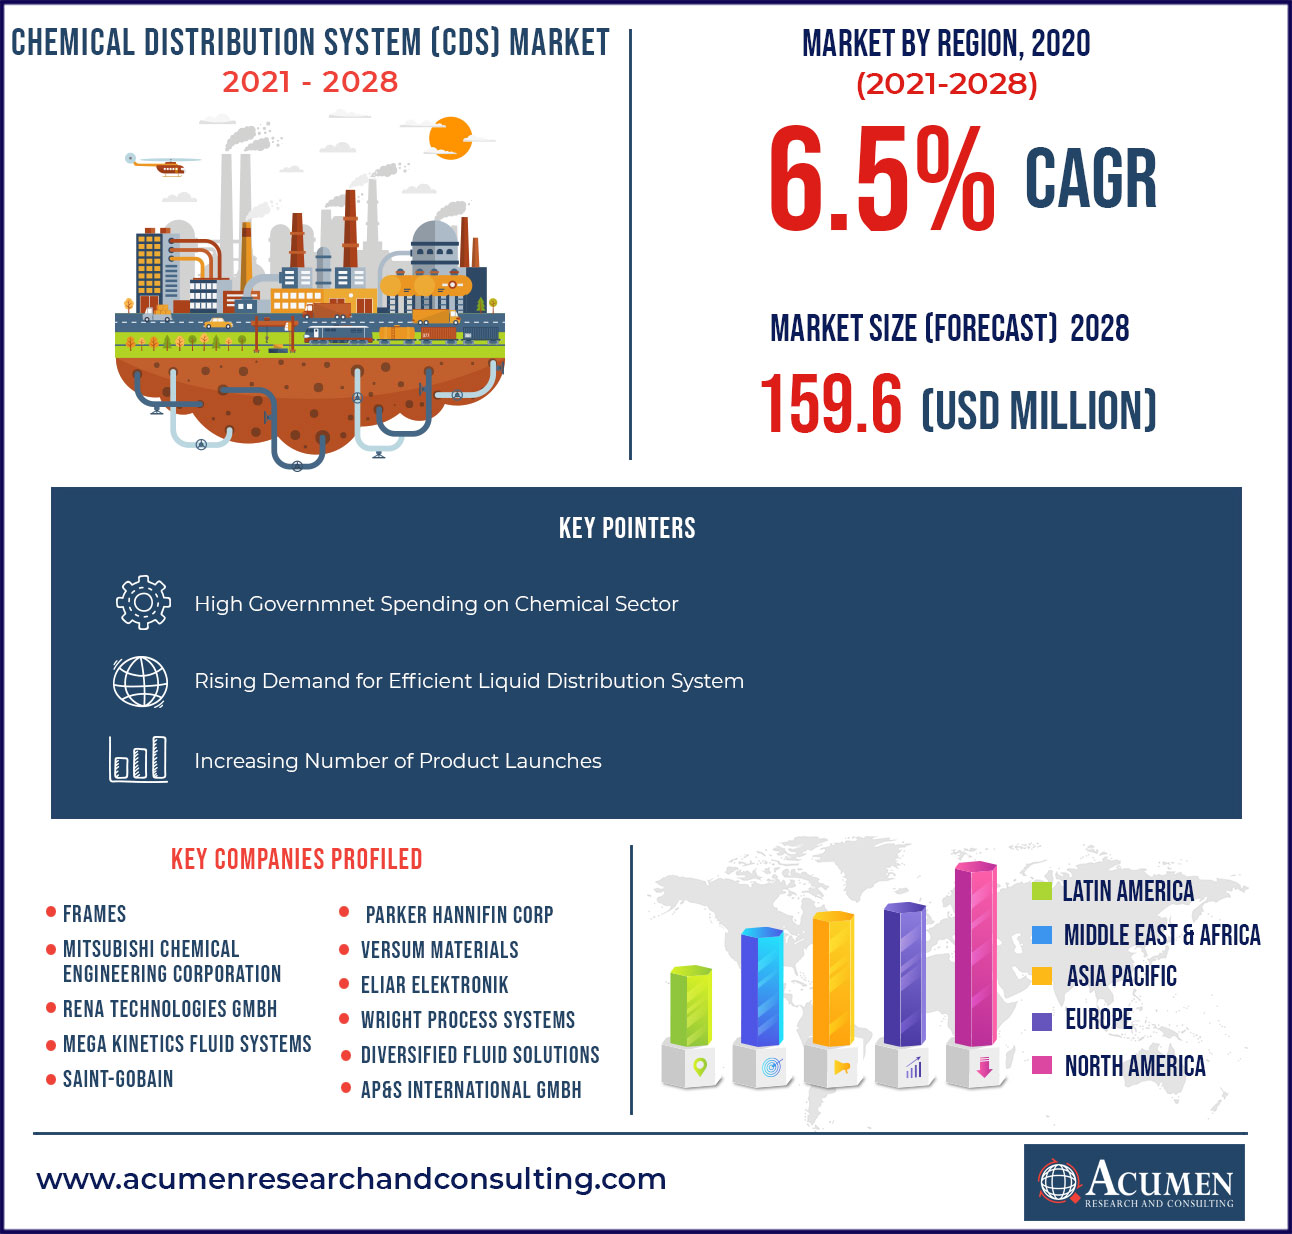 Chemical Distribution System (CDS) Market - CAGR of 6.5% from 2021-2028